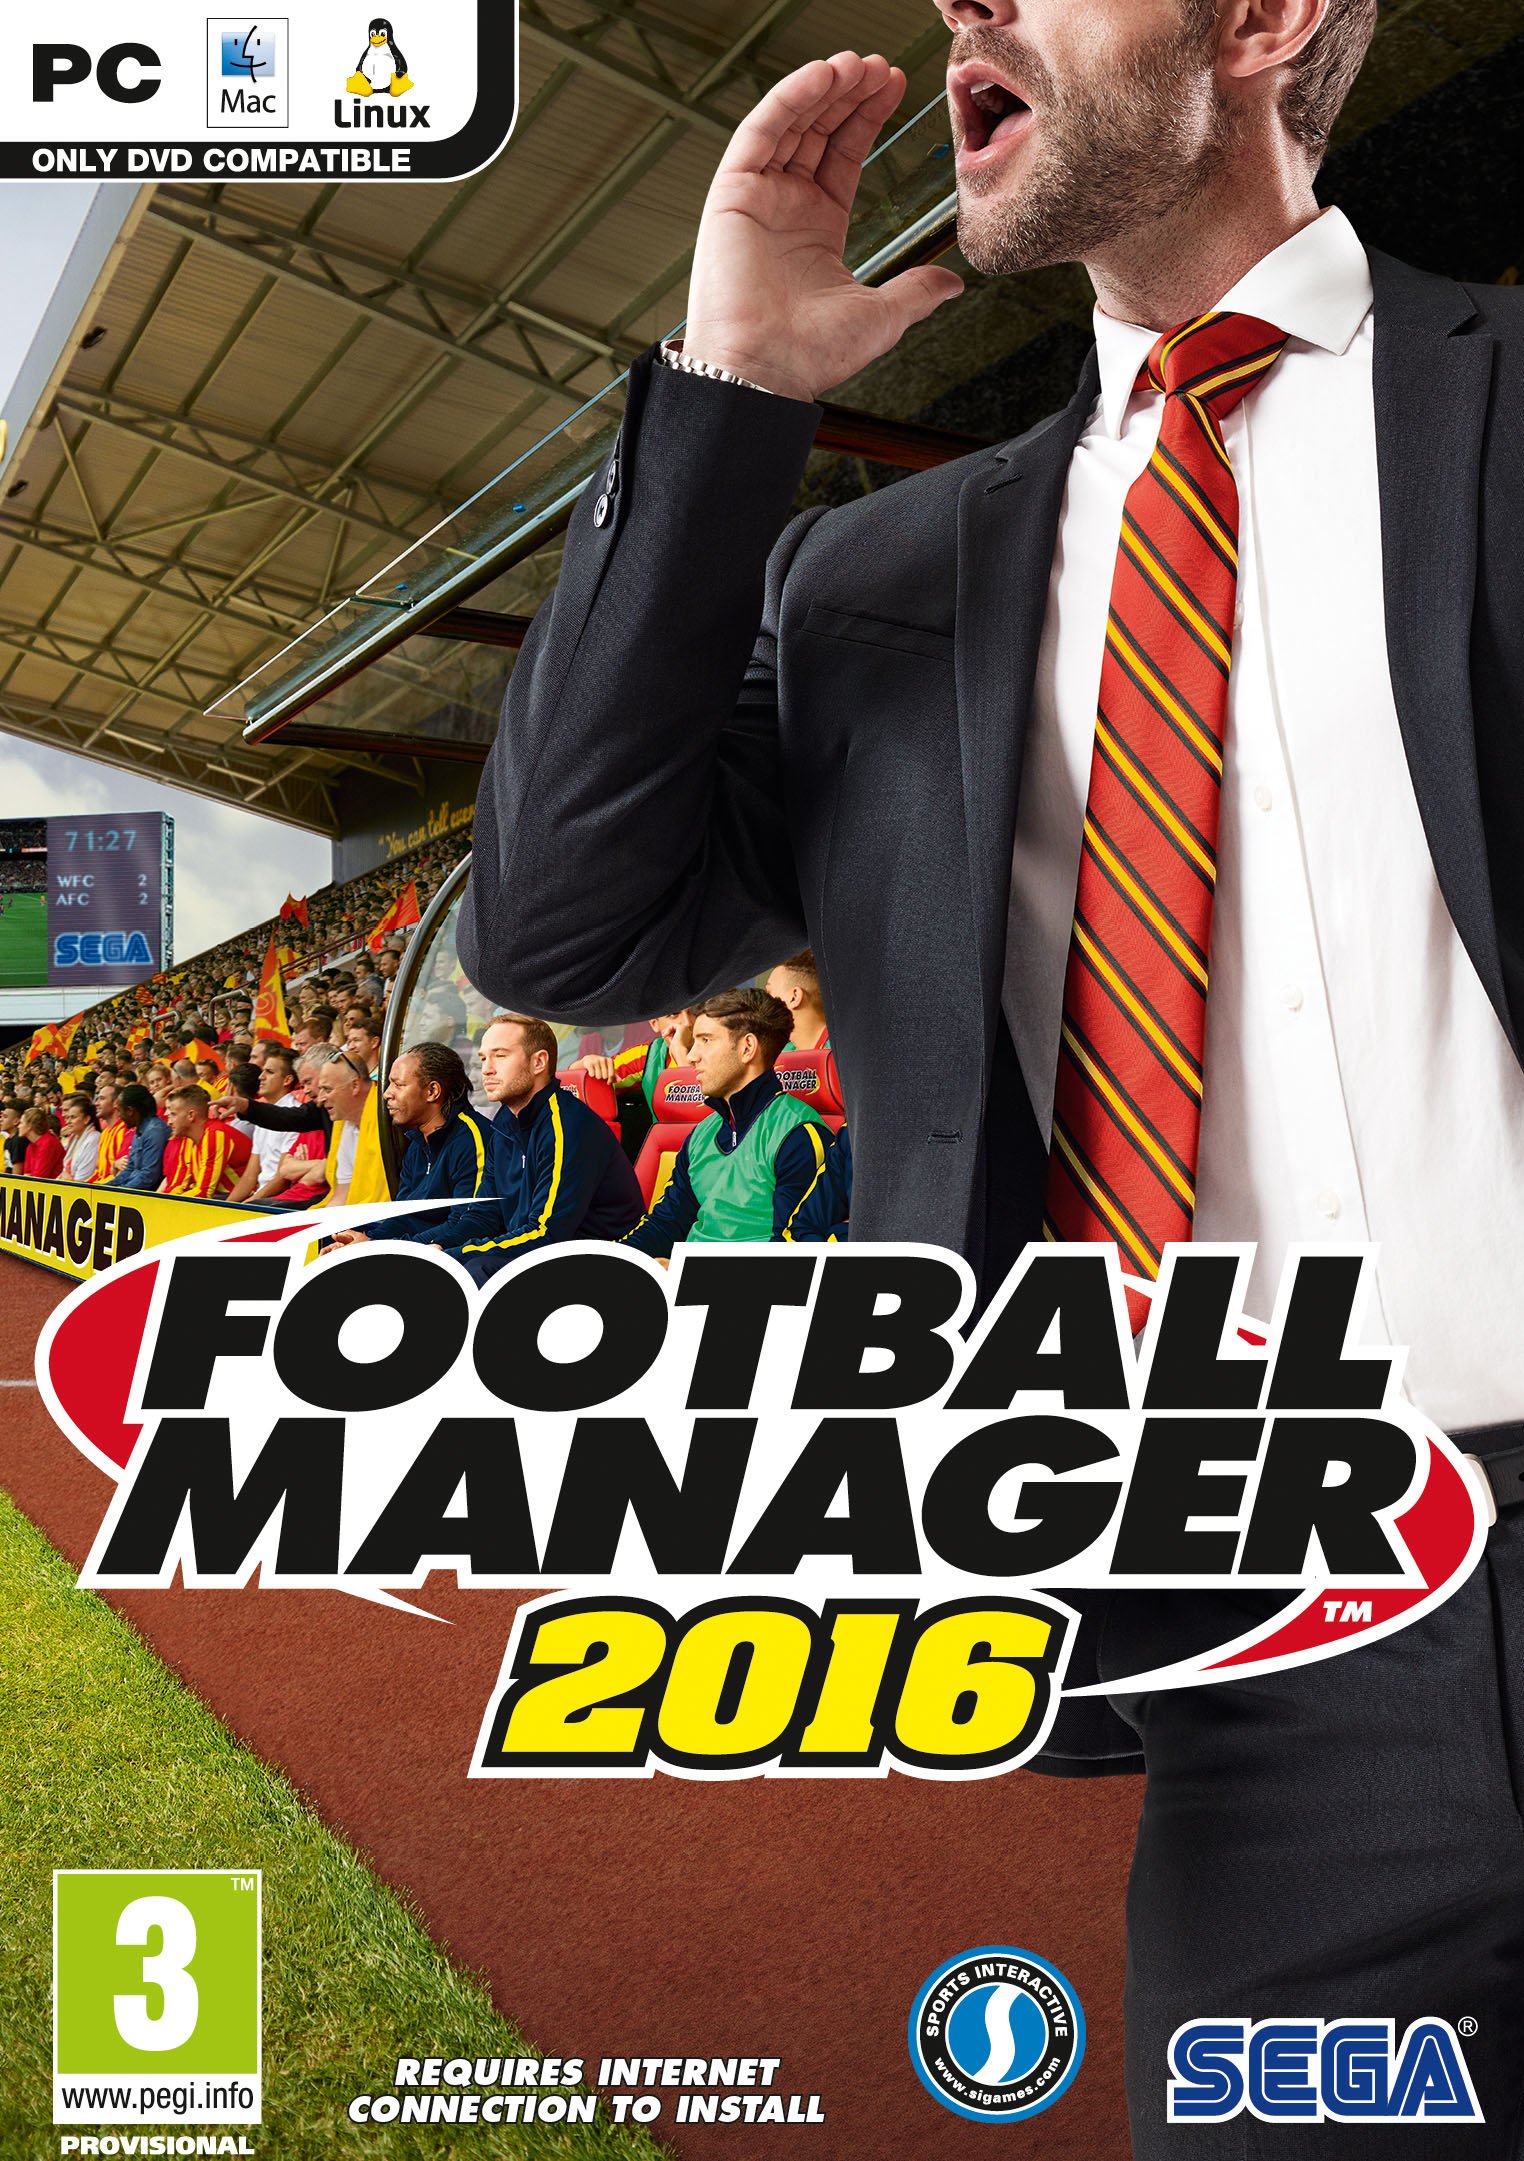 football manager 2016 code